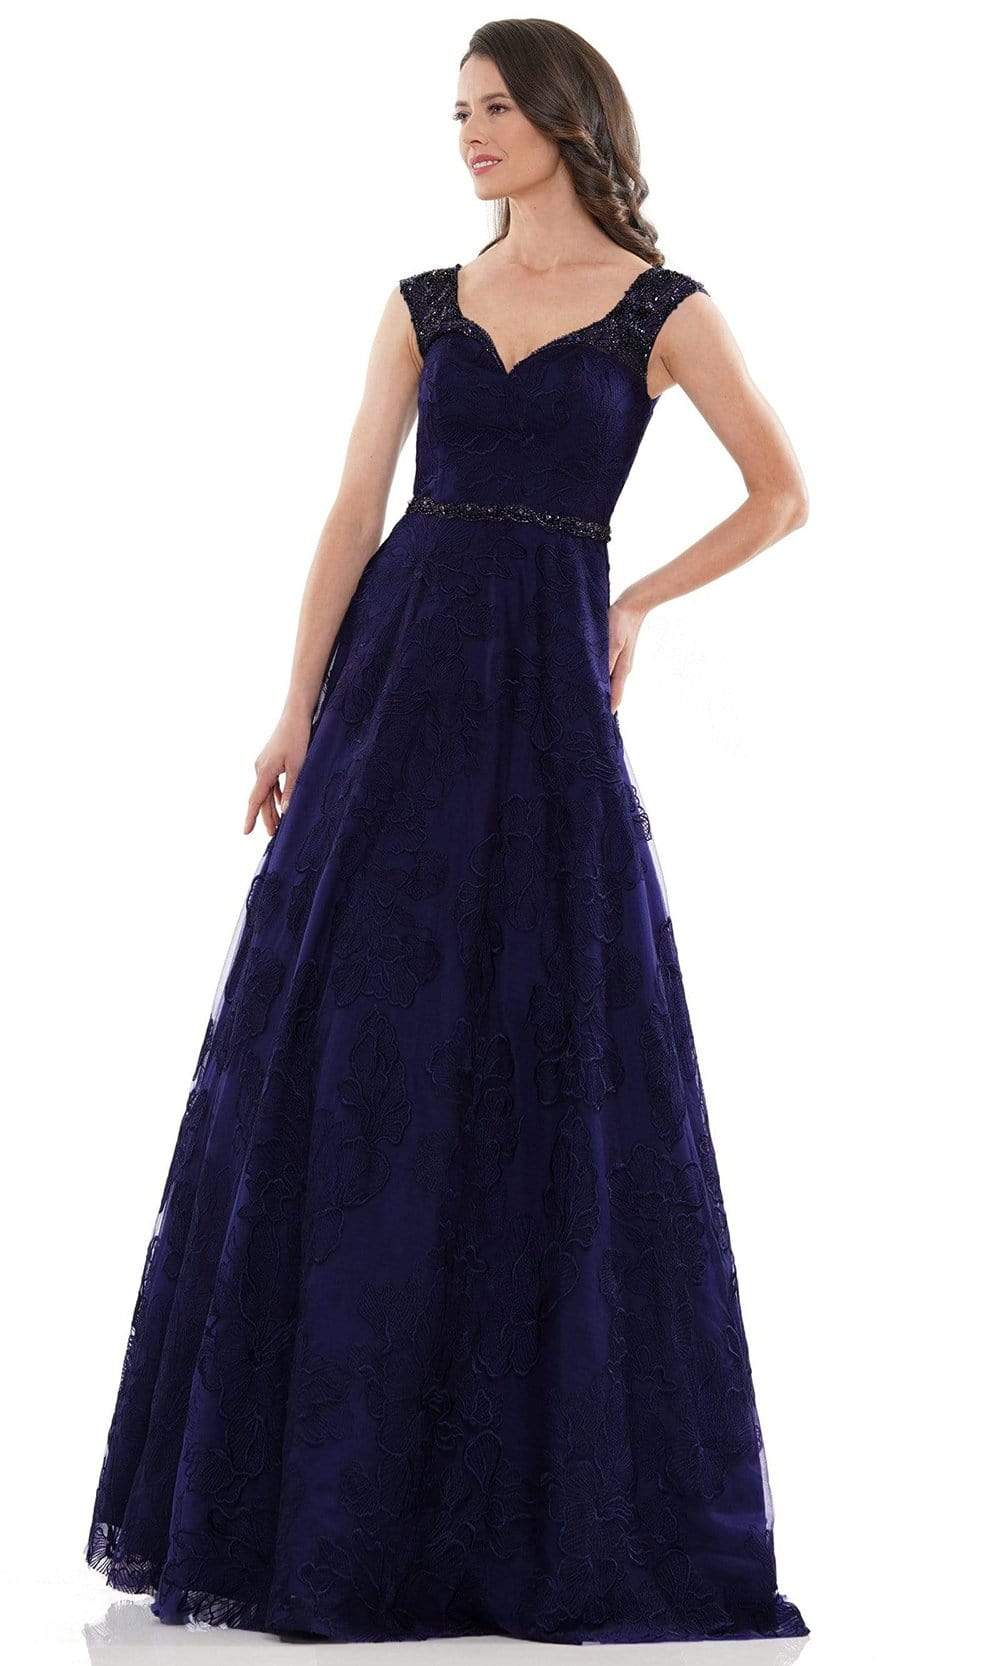 Marsoni by Colors - MV1129 Floral Detailed Voluminous A-line Dress Mother of the Bride Dresses 4 / Navy